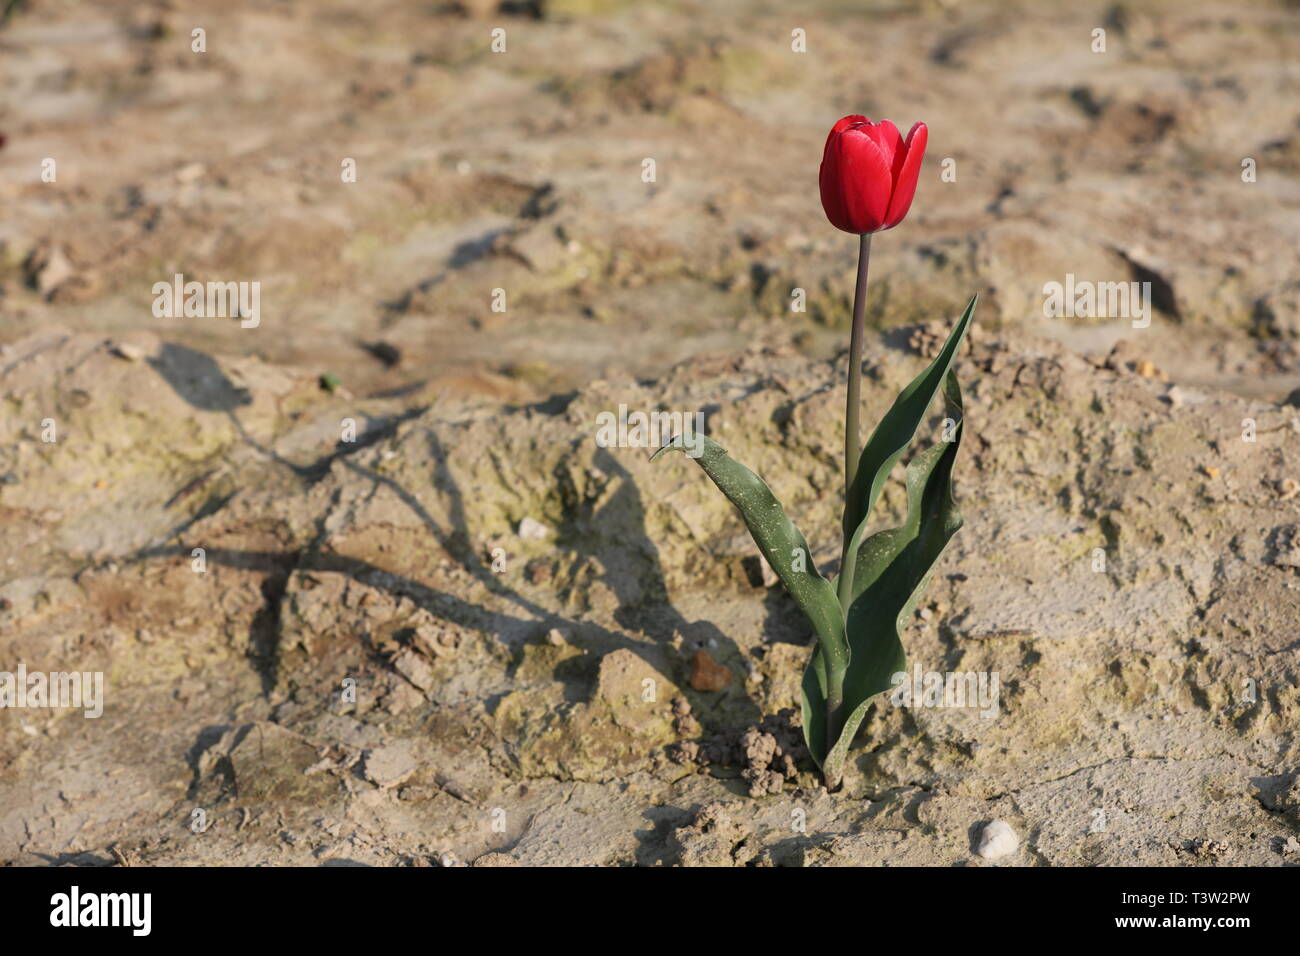 Tulips on a dry field Stock Photo